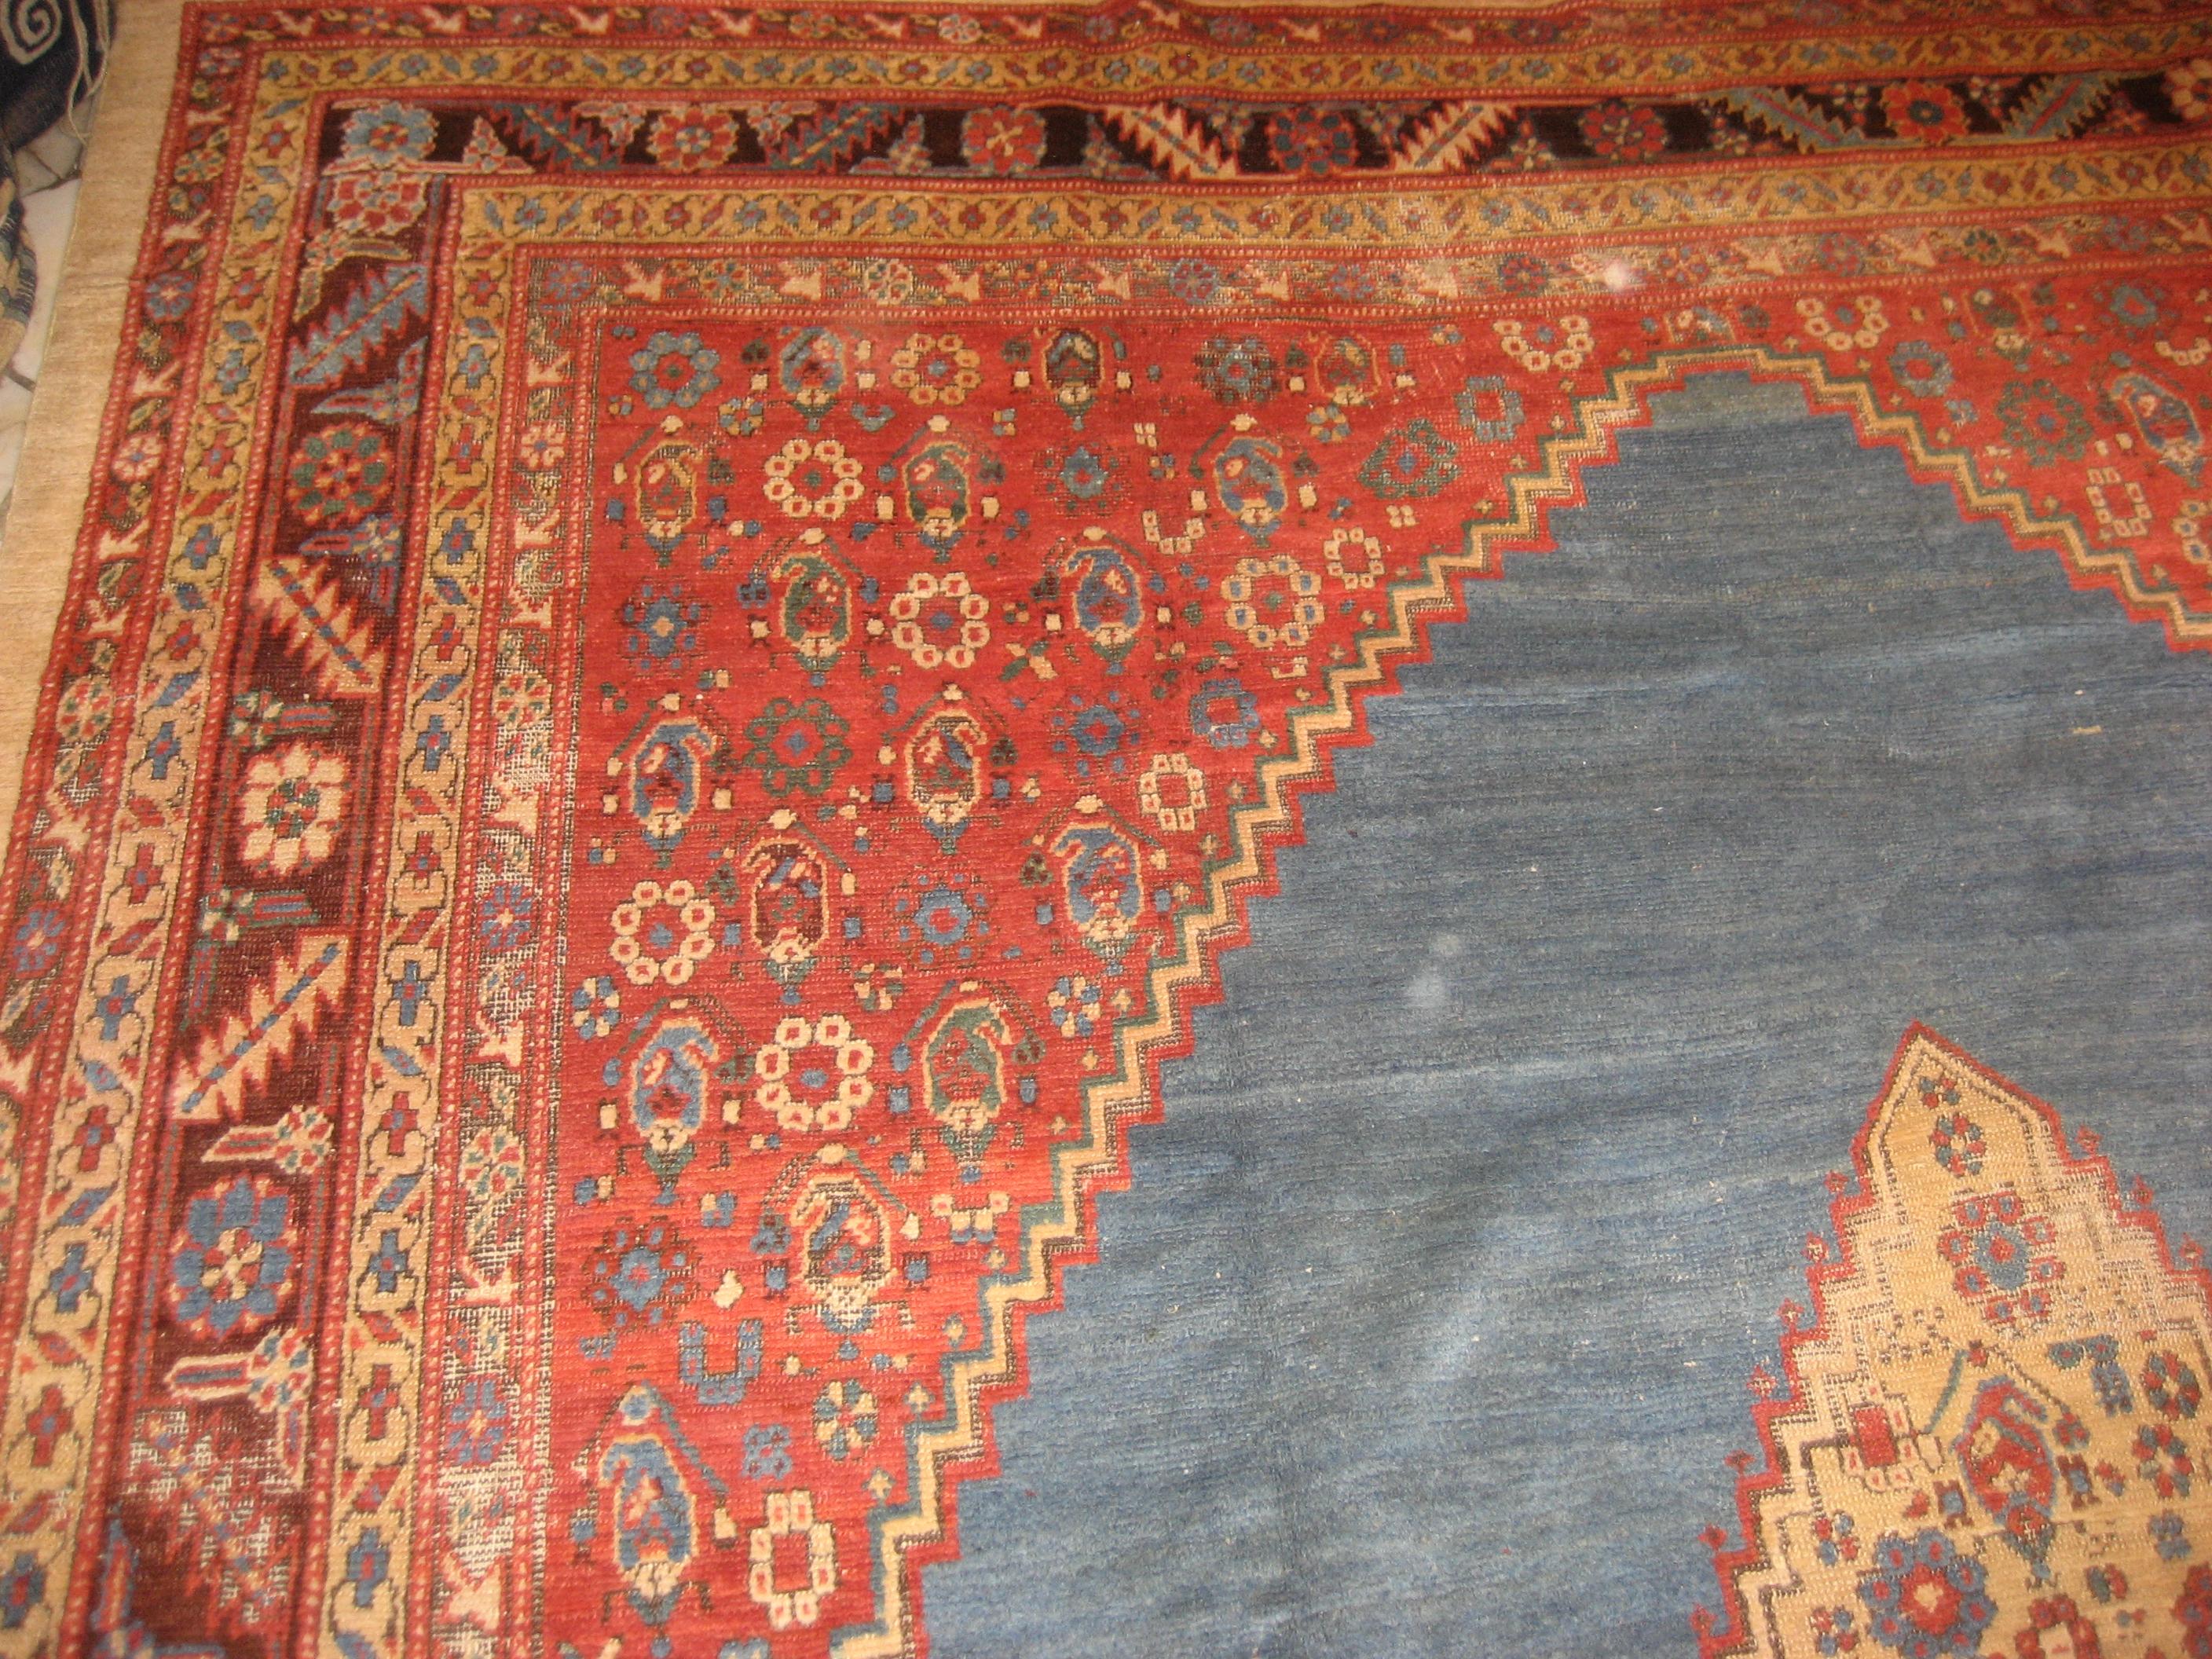 The subtly changing sky-blue background of this fascinating carpet, obtained by means of a number of colour gradations, creates the impression of a sea on which floats a sun-like lozenge, spangled by polychrome rosettes. The refined primitivism of